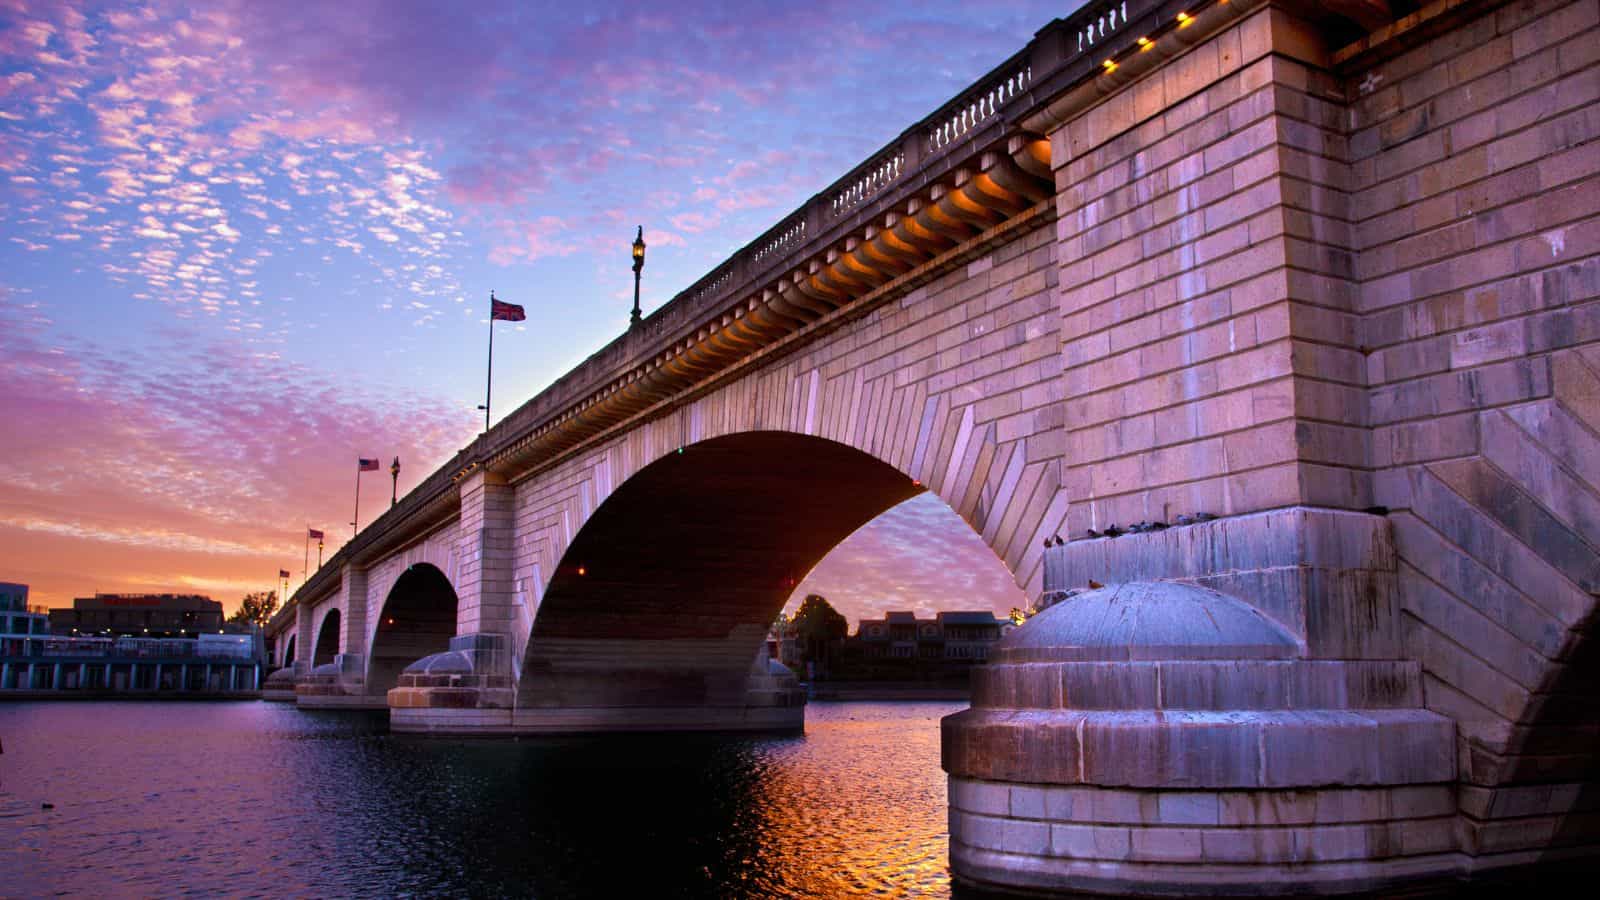 <p>Yes, it’s that London Bridge, but in Arizona. While it’s an interesting piece of history, it just feels out of place and makes you miss the Thames.</p>